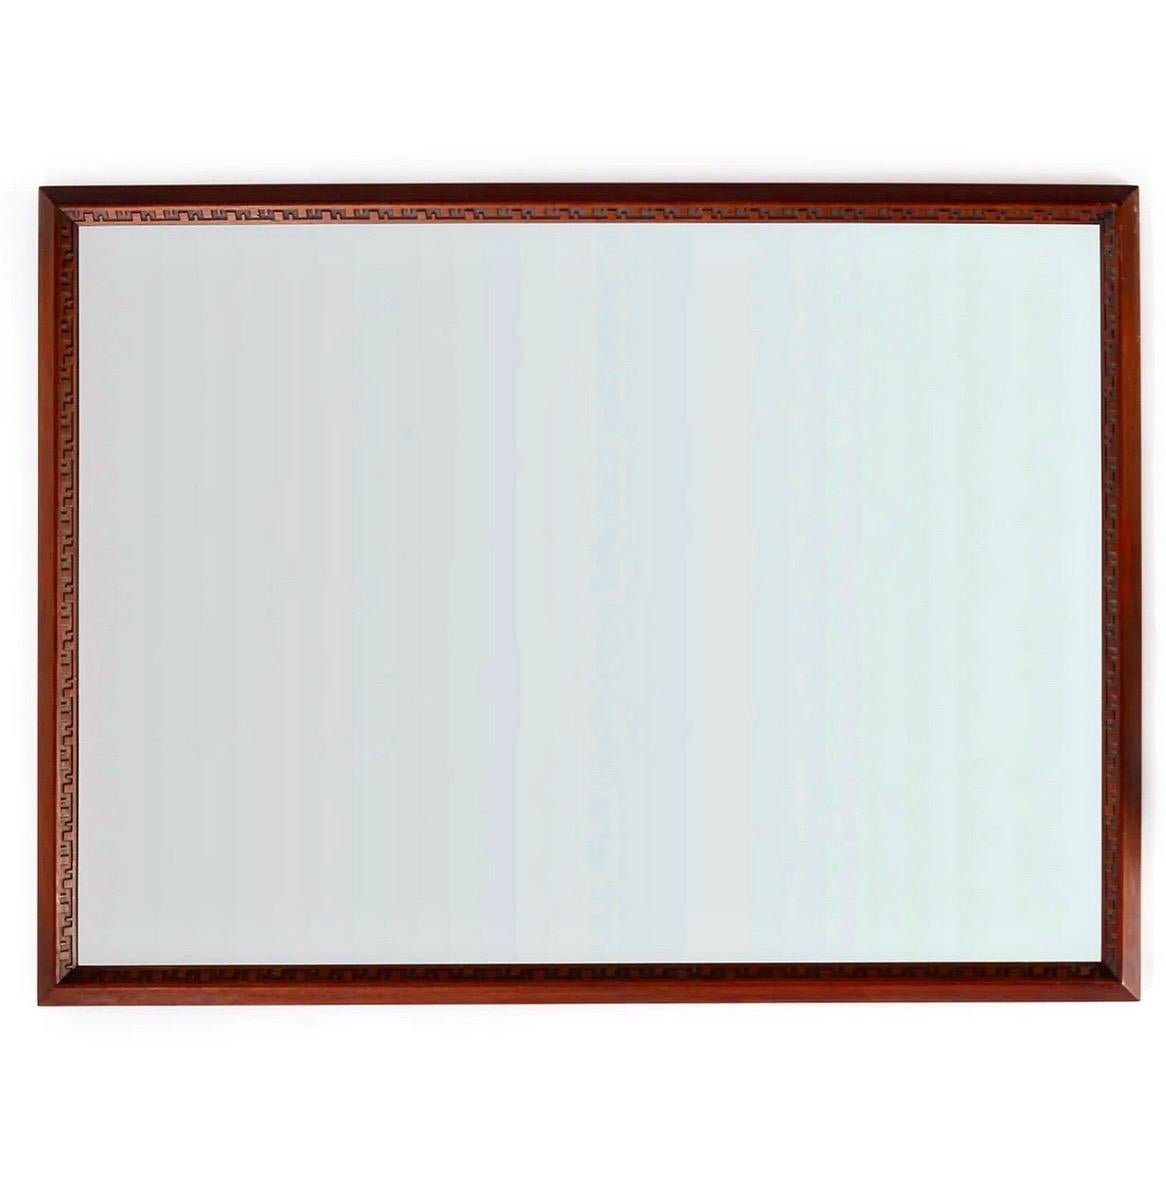 Frank Lloyd Wright for Heritage Henredon - Taliesin Group rectangular mirror circa 1955/56. Solid Mahogany. 
All original - looks to have been hardly, if ever used. Mahogany has been cleaned and conditioned. Mirrored glass is in excellent condition,